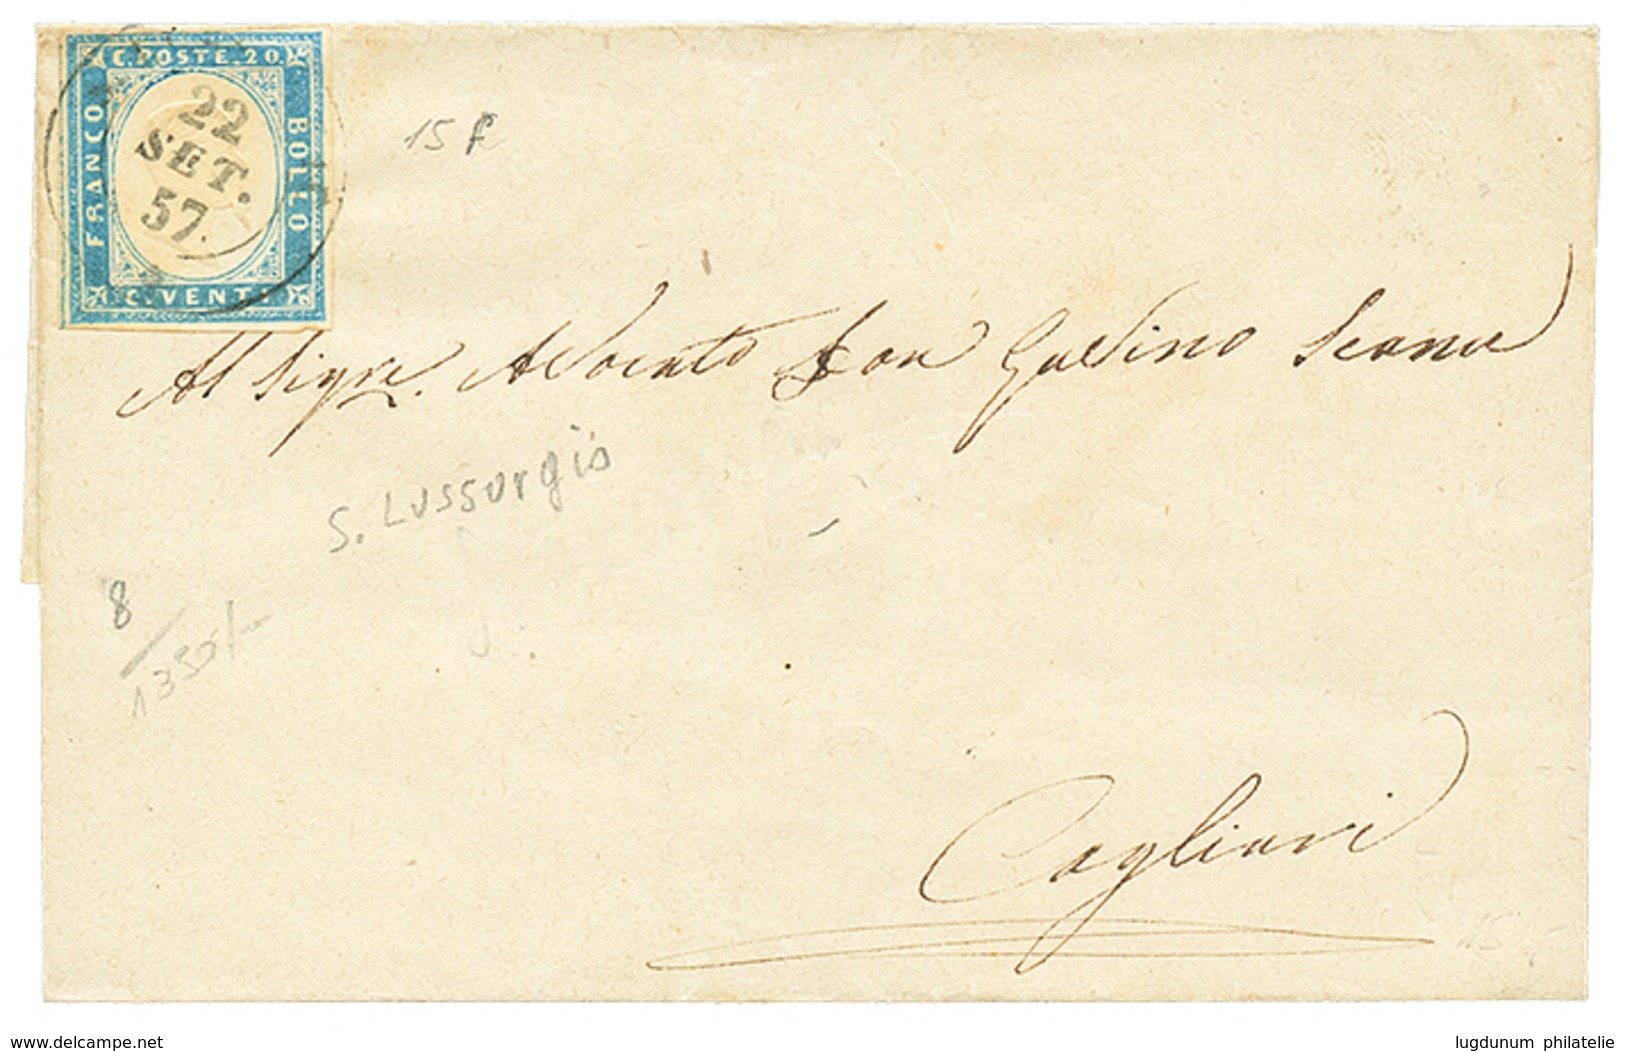 899 S."LUSSURGIO" 1857 SARDINIA 20c(n°15) Canc. S.LUSSURGIO On Cover To CAGLIARI. Sass. = 1350€. Vf. - Ohne Zuordnung